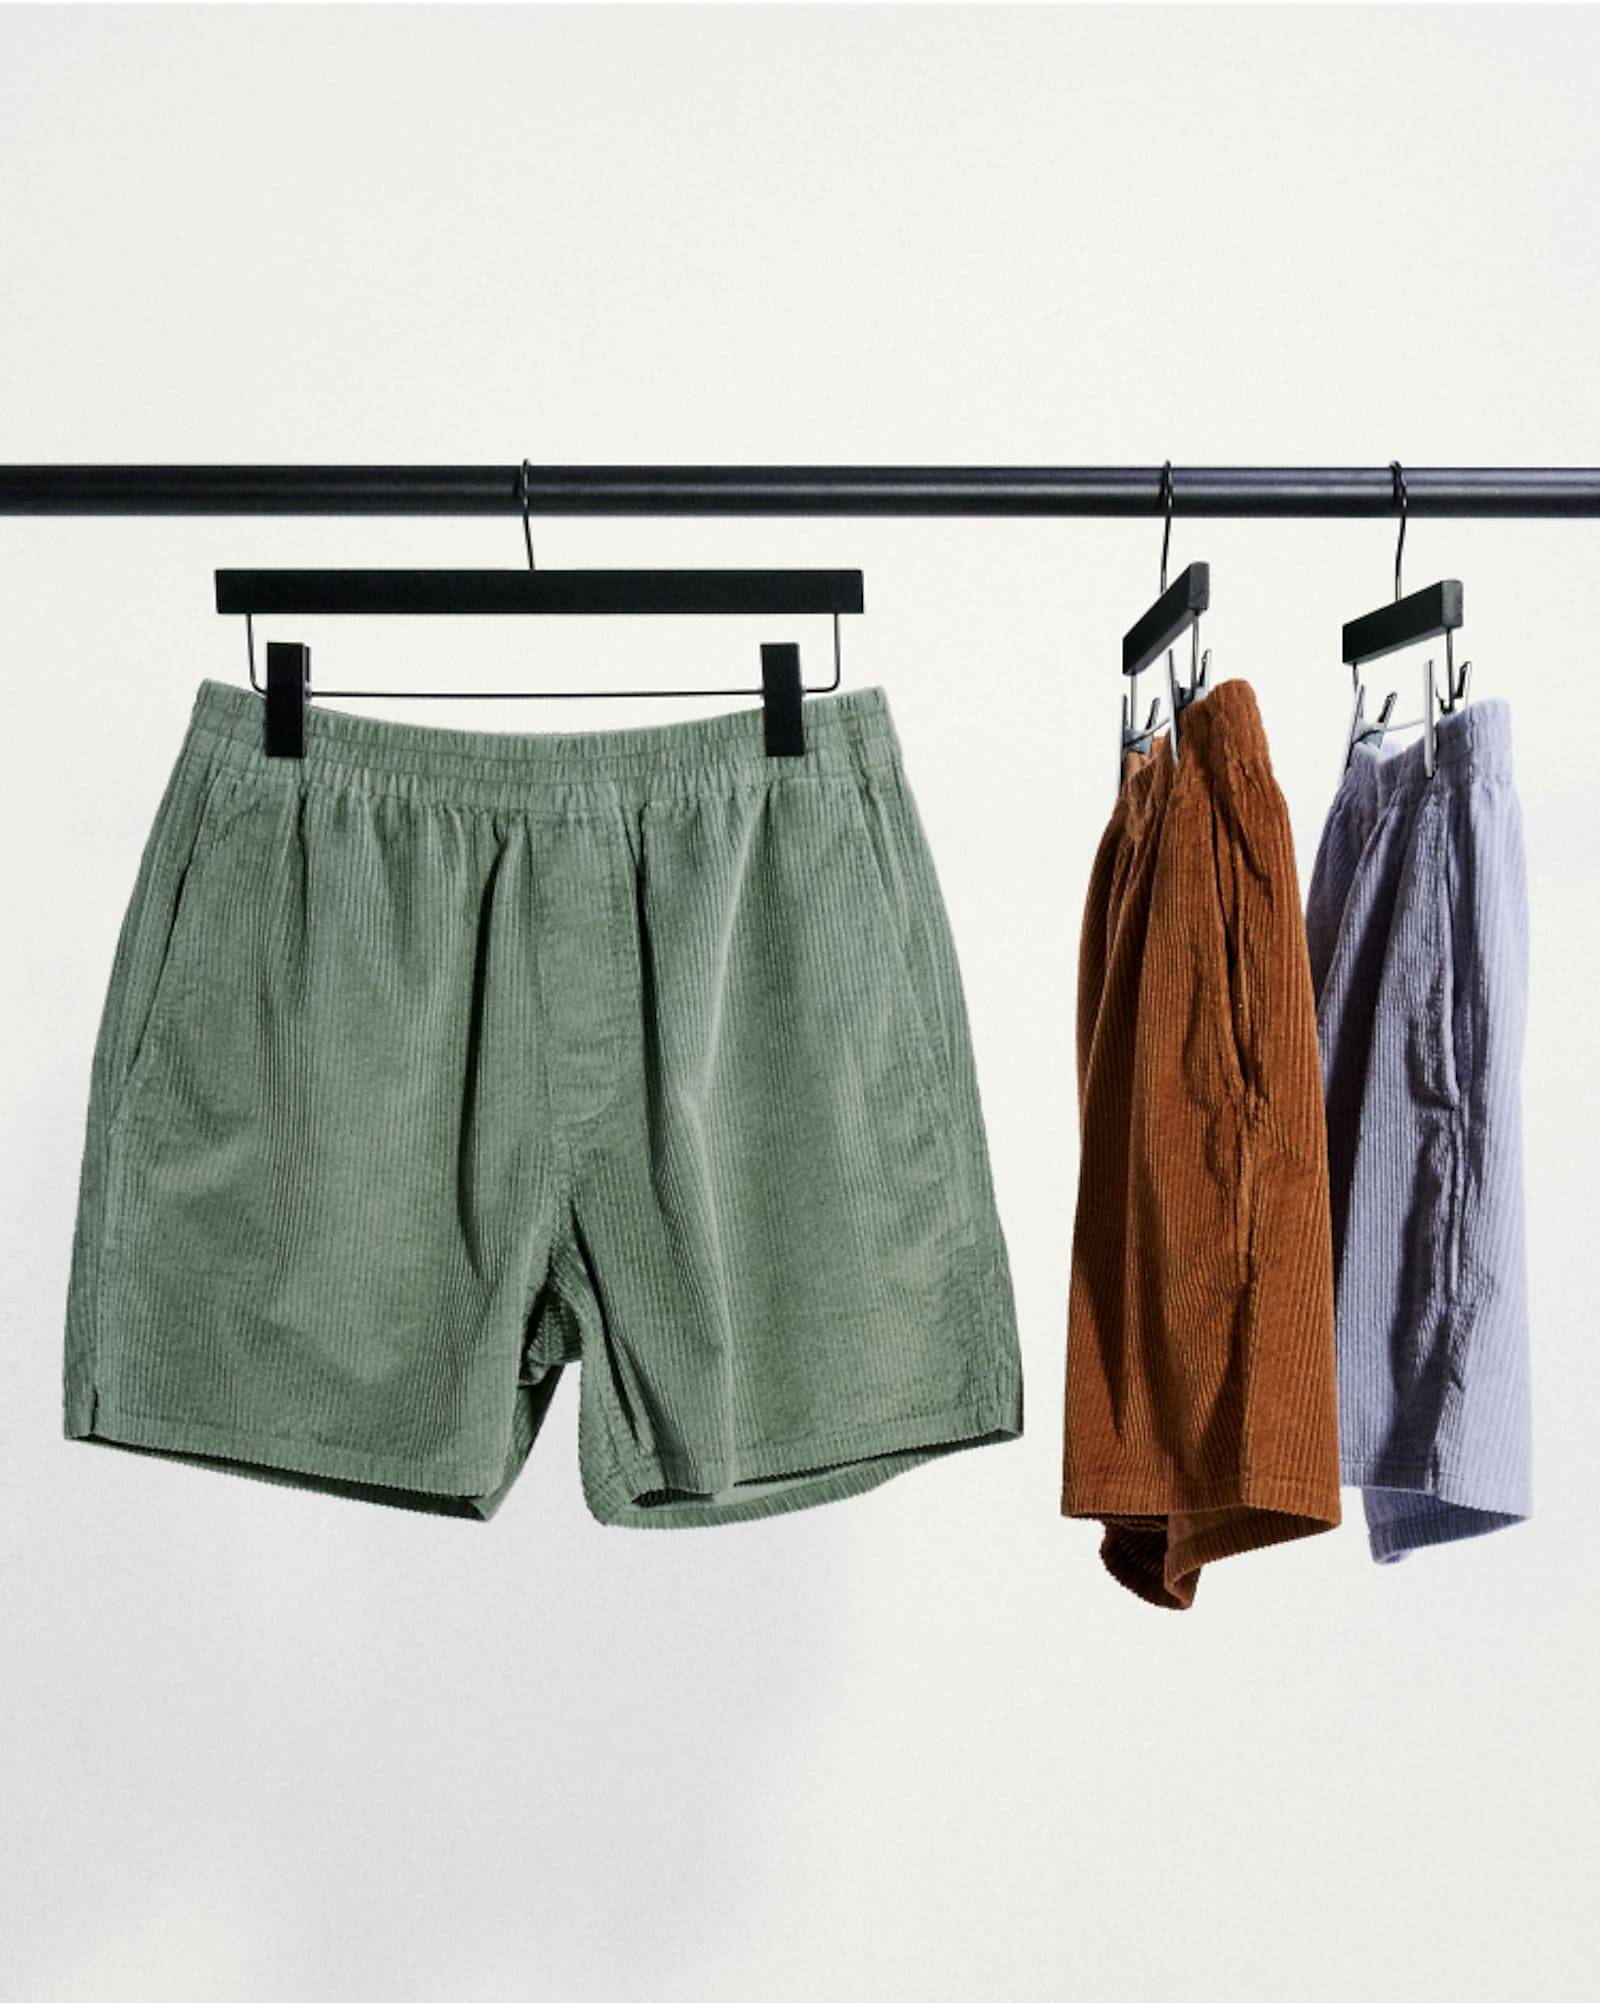 3 shorts on hangers, green, red, and blue